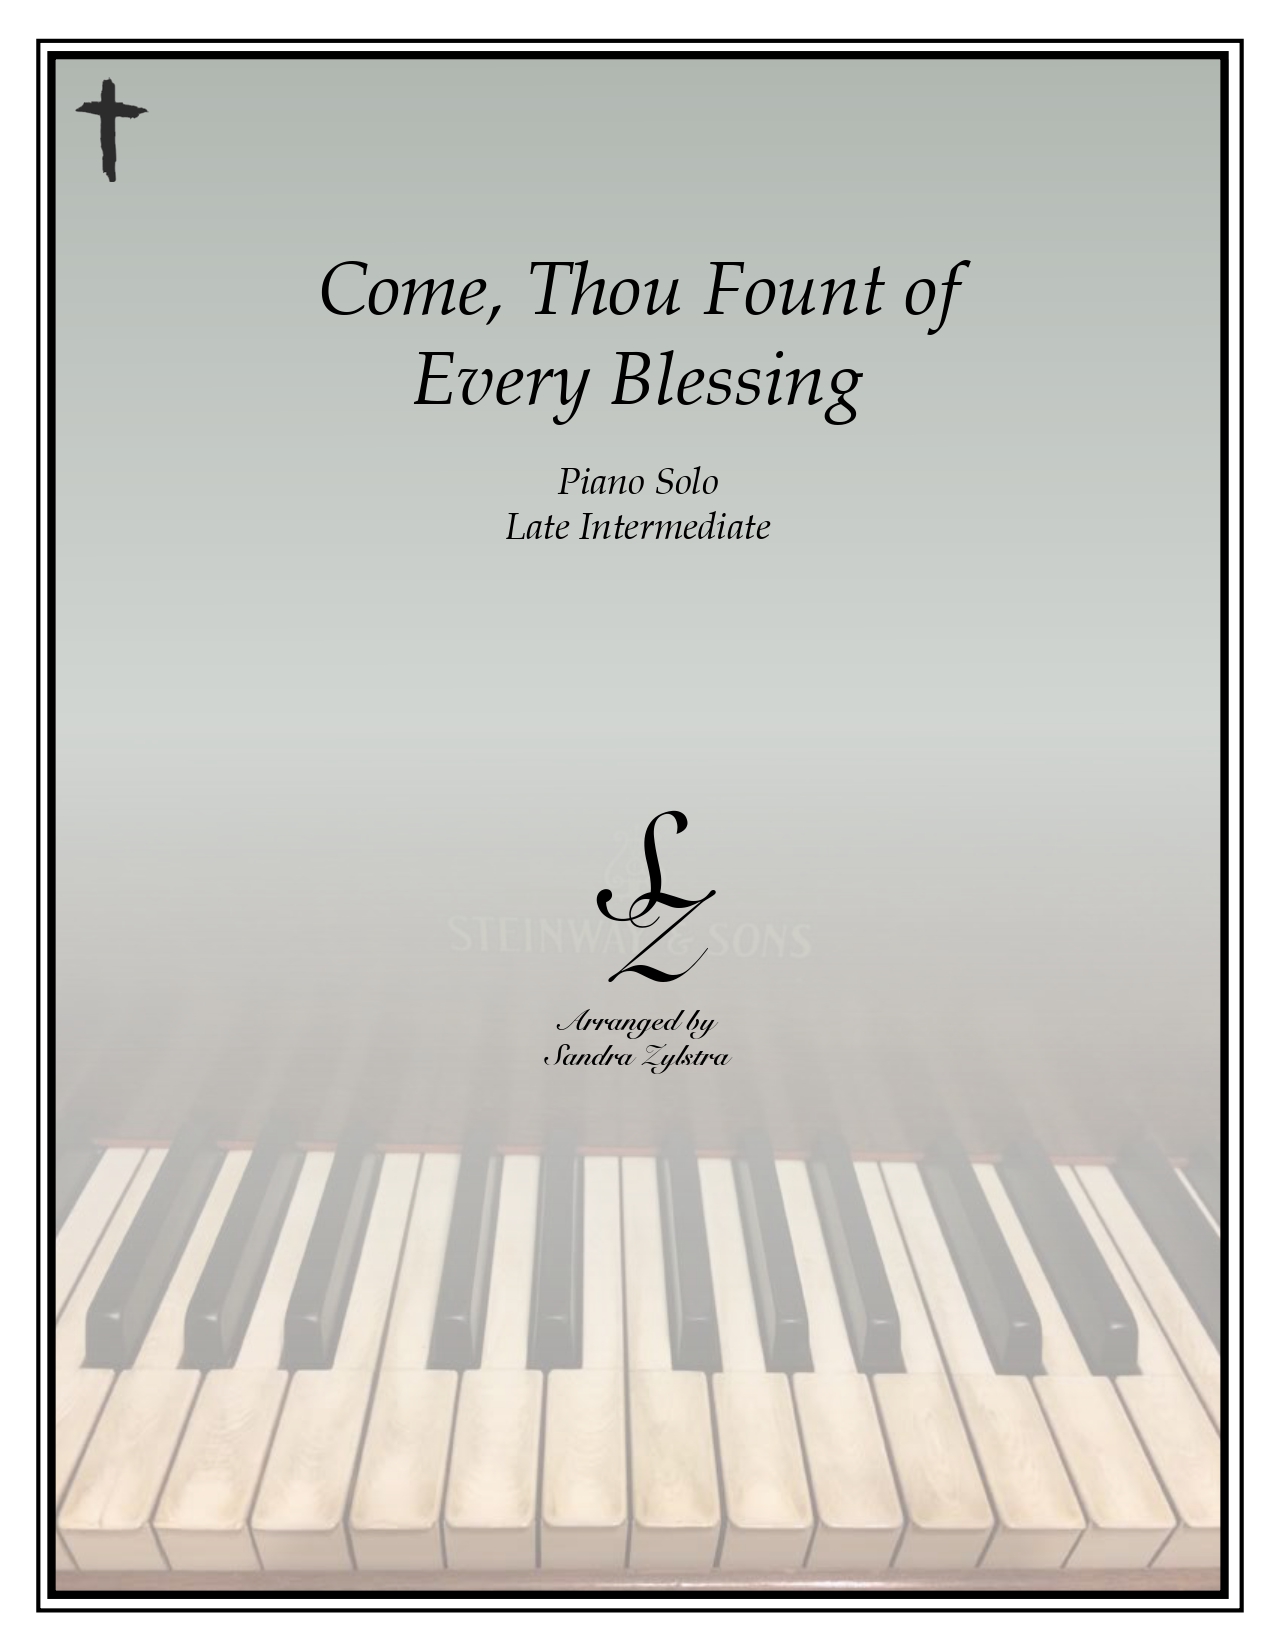 Come Thou Fount Of Every Blessing late intermediate piano cover page 00011